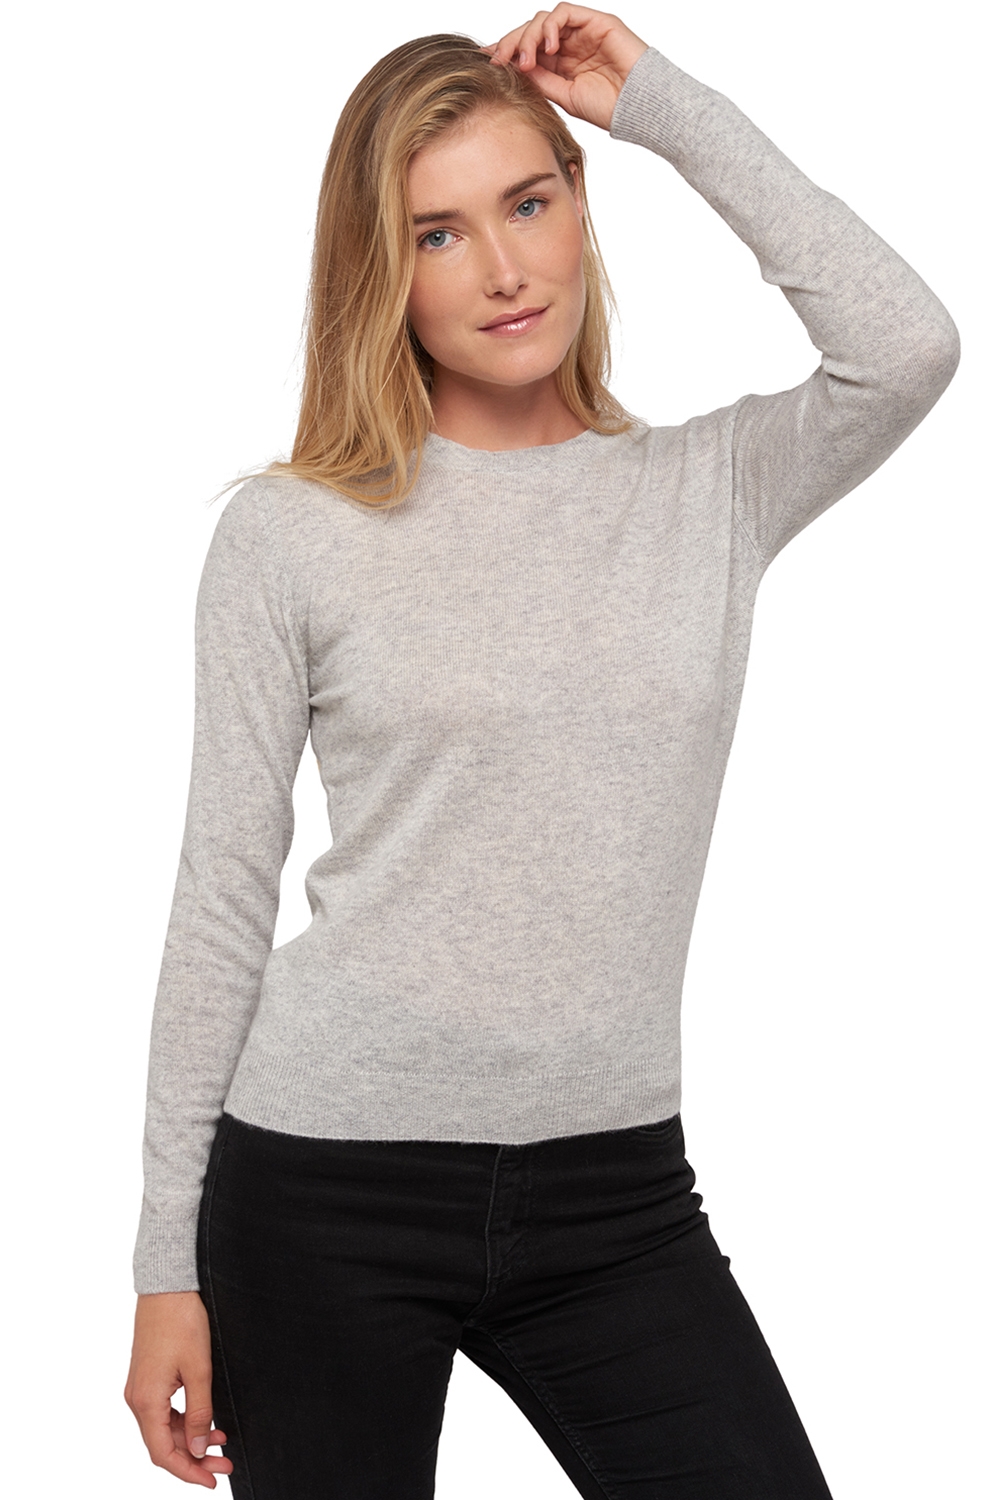 Cashmere ladies basic sweaters at low prices thalia first flannel xs